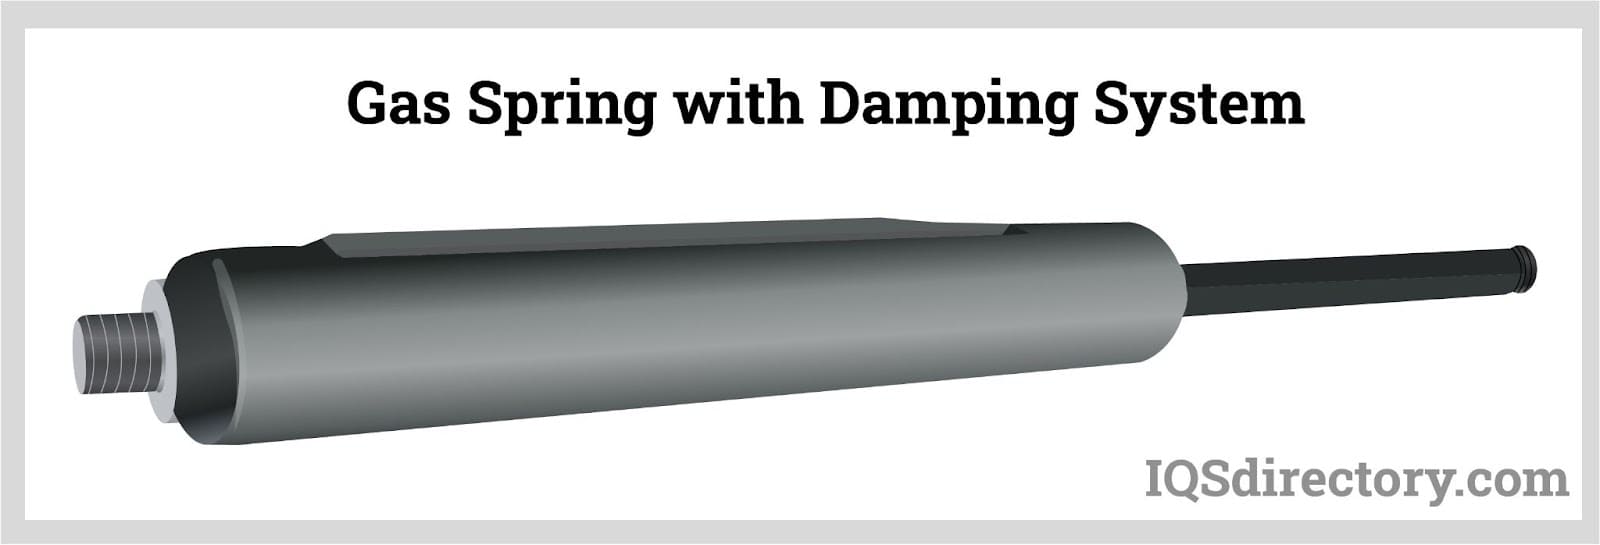 Gas Spring with Damping System